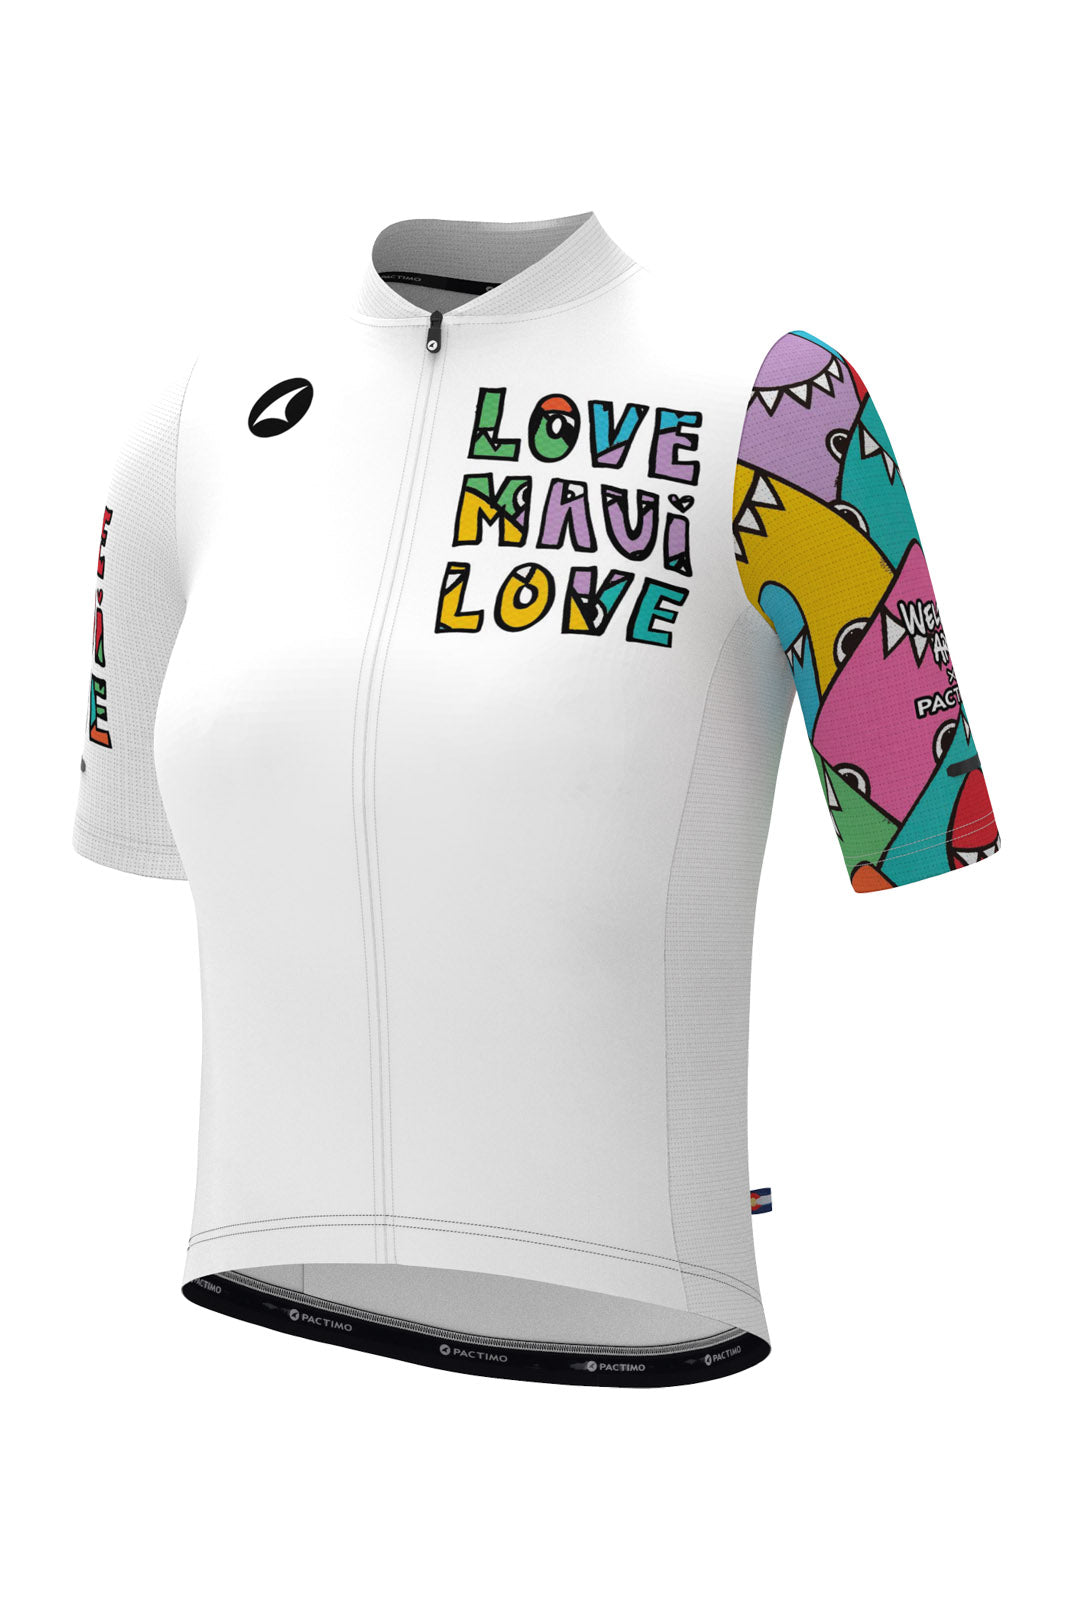 Maui Relief Aero Cycling Jersey for Women - Welzie Design Front View